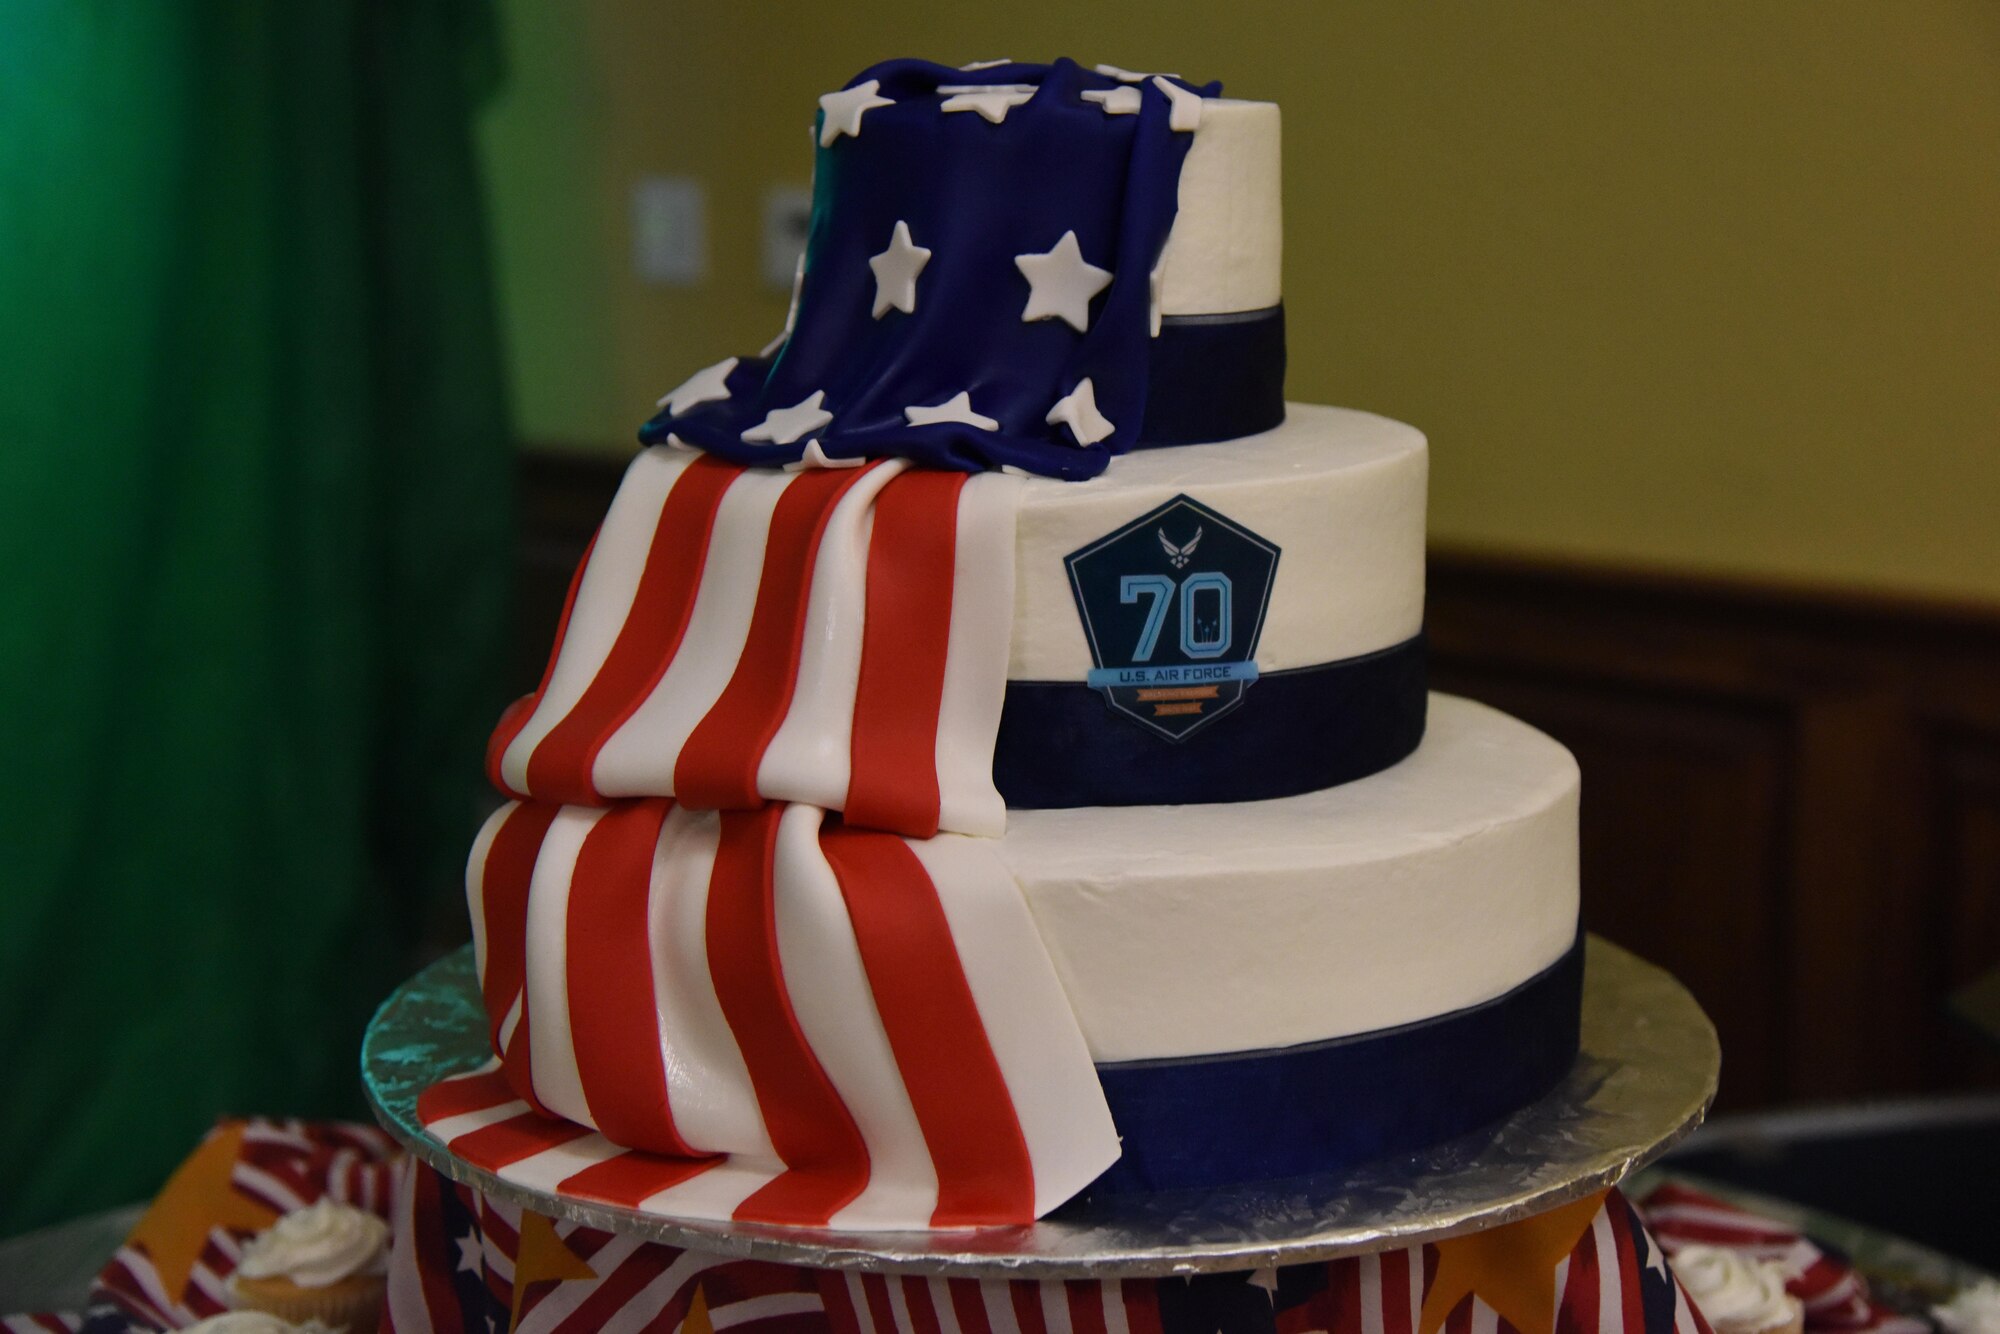 A birthday cake is on display during the U.S. Air Force 70th Birthday Ball at the Bay Breeze Event Center Sept. 16, 2017, on Keesler Air Force Base, Mississippi. The event, hosted by the 81st Training Wing and the John C. Stennis Chapter of the Air Force Association, also paid tribute to all prisoners of war and military members still missing in action. (U.S. Air Force photo by Kemberly Groue)